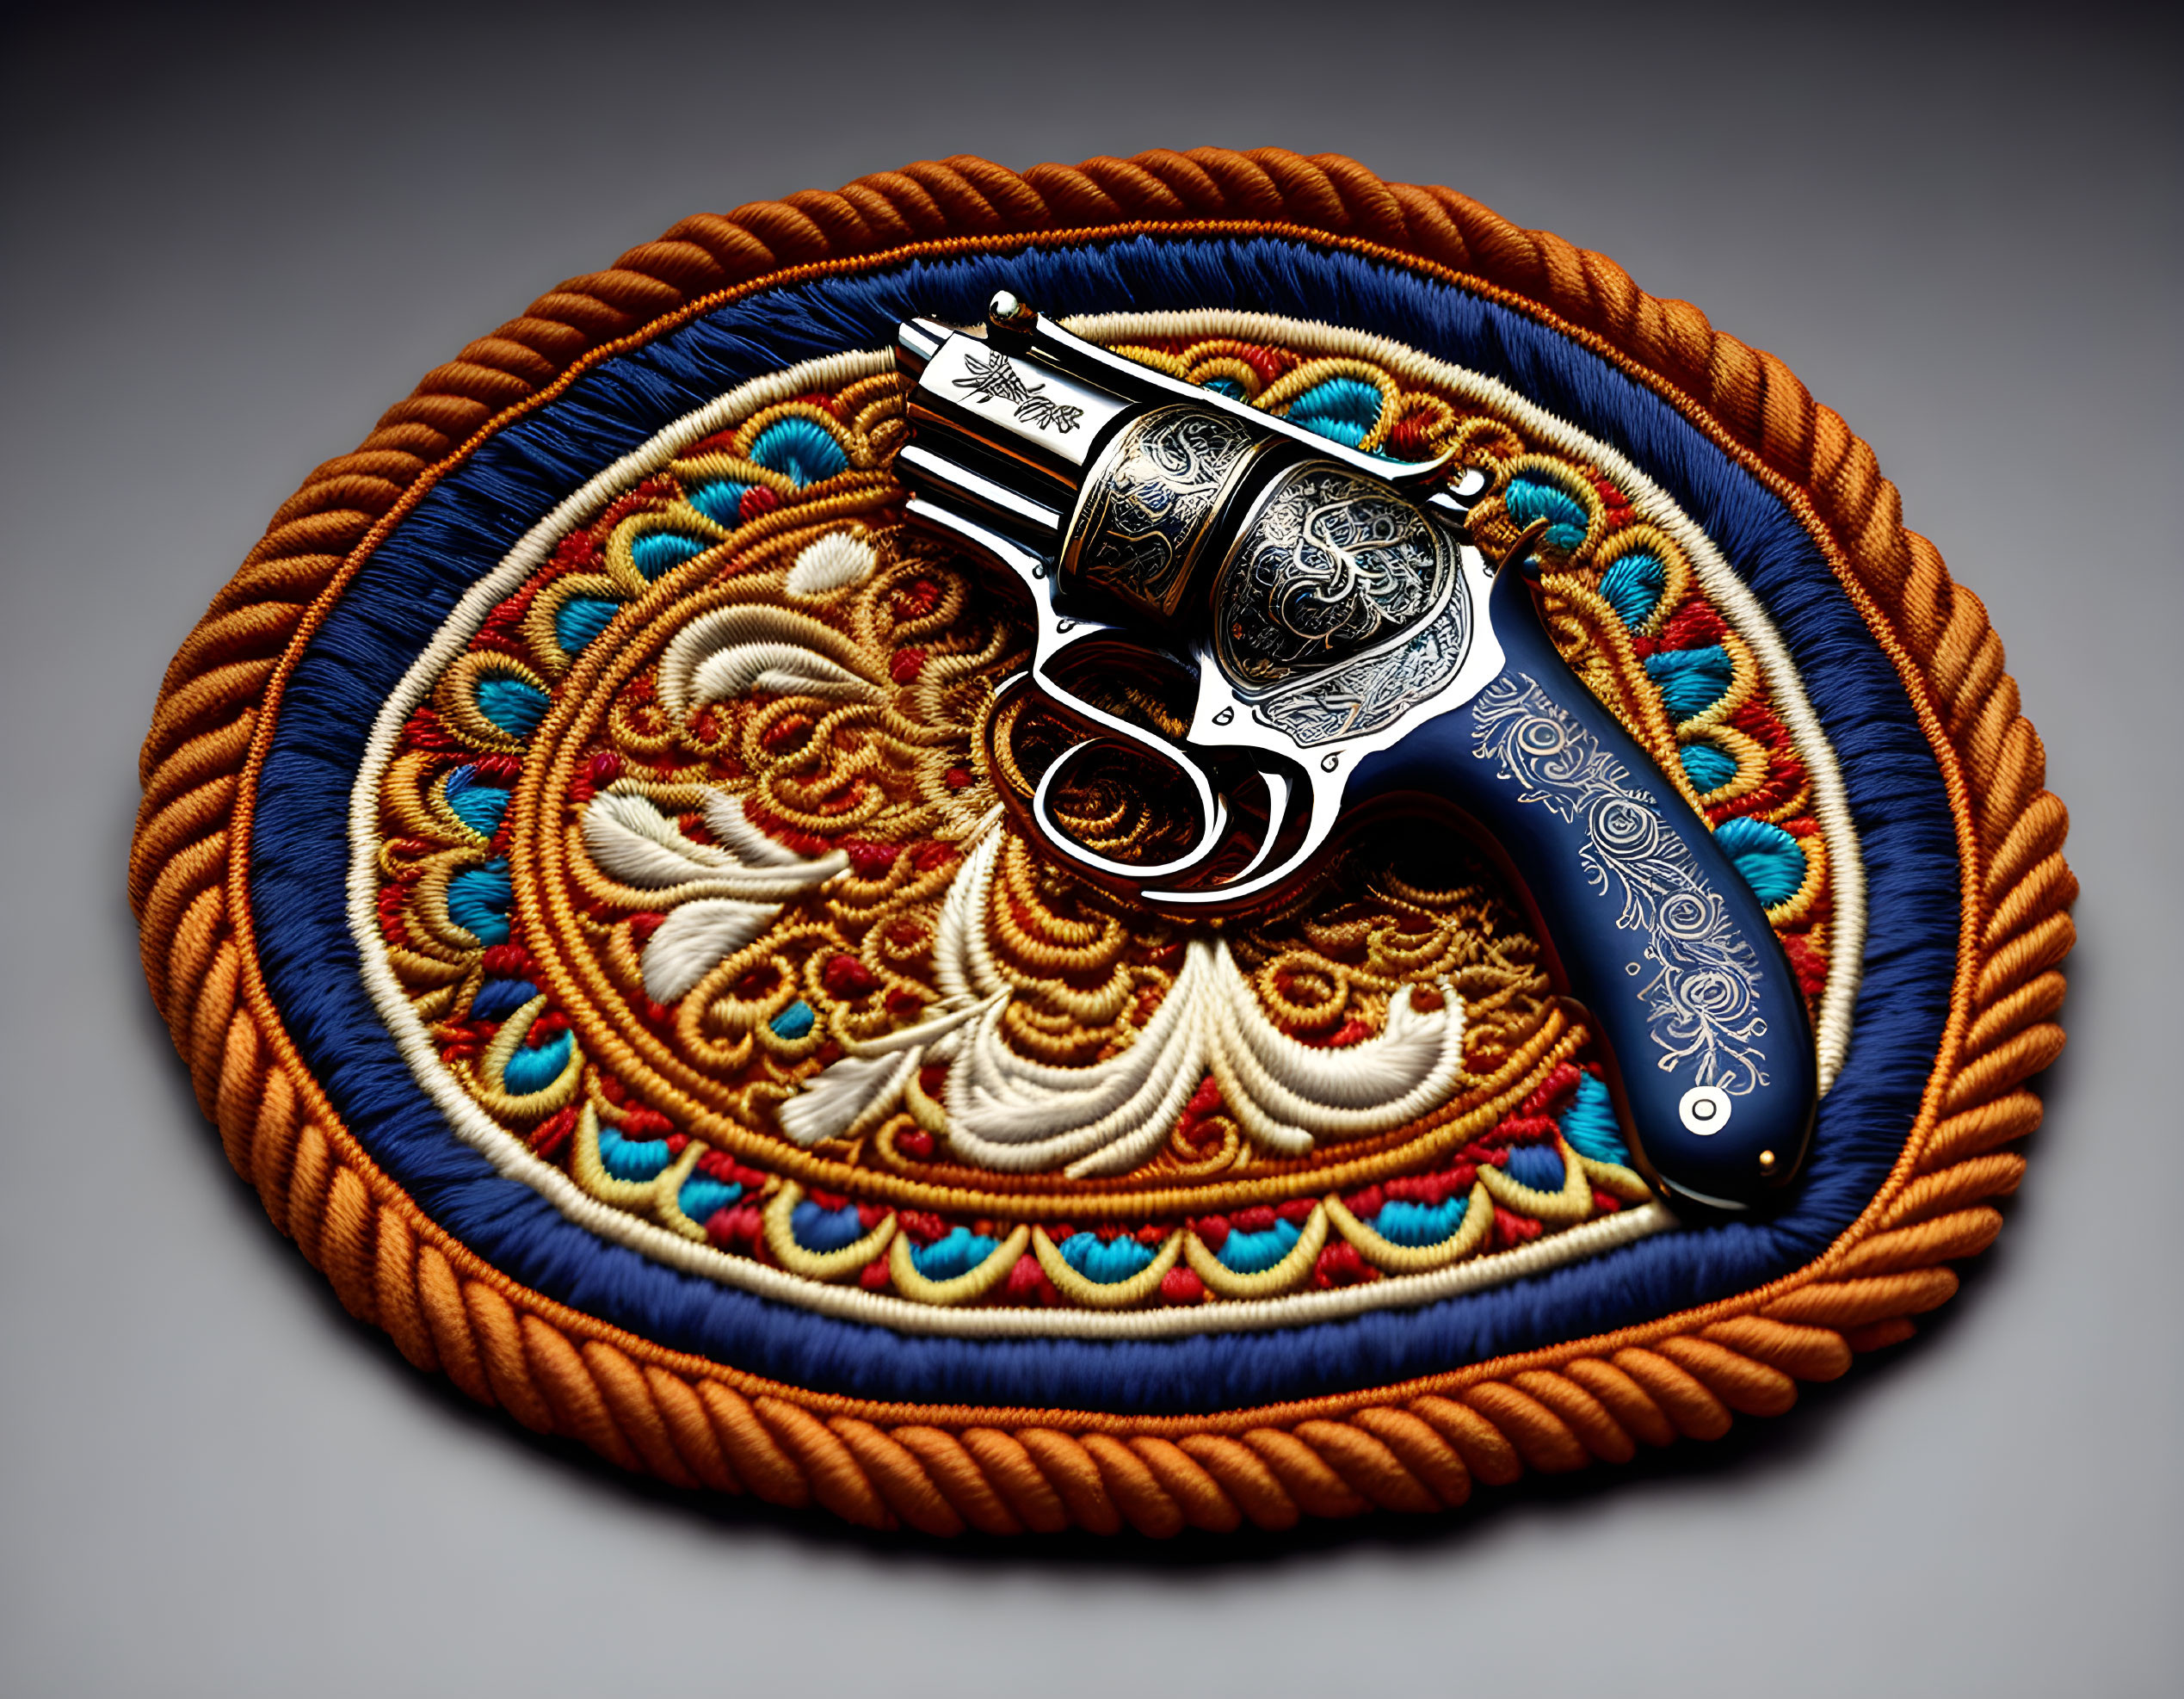 Ornately Engraved Revolver on Multicolored Circular Fabric